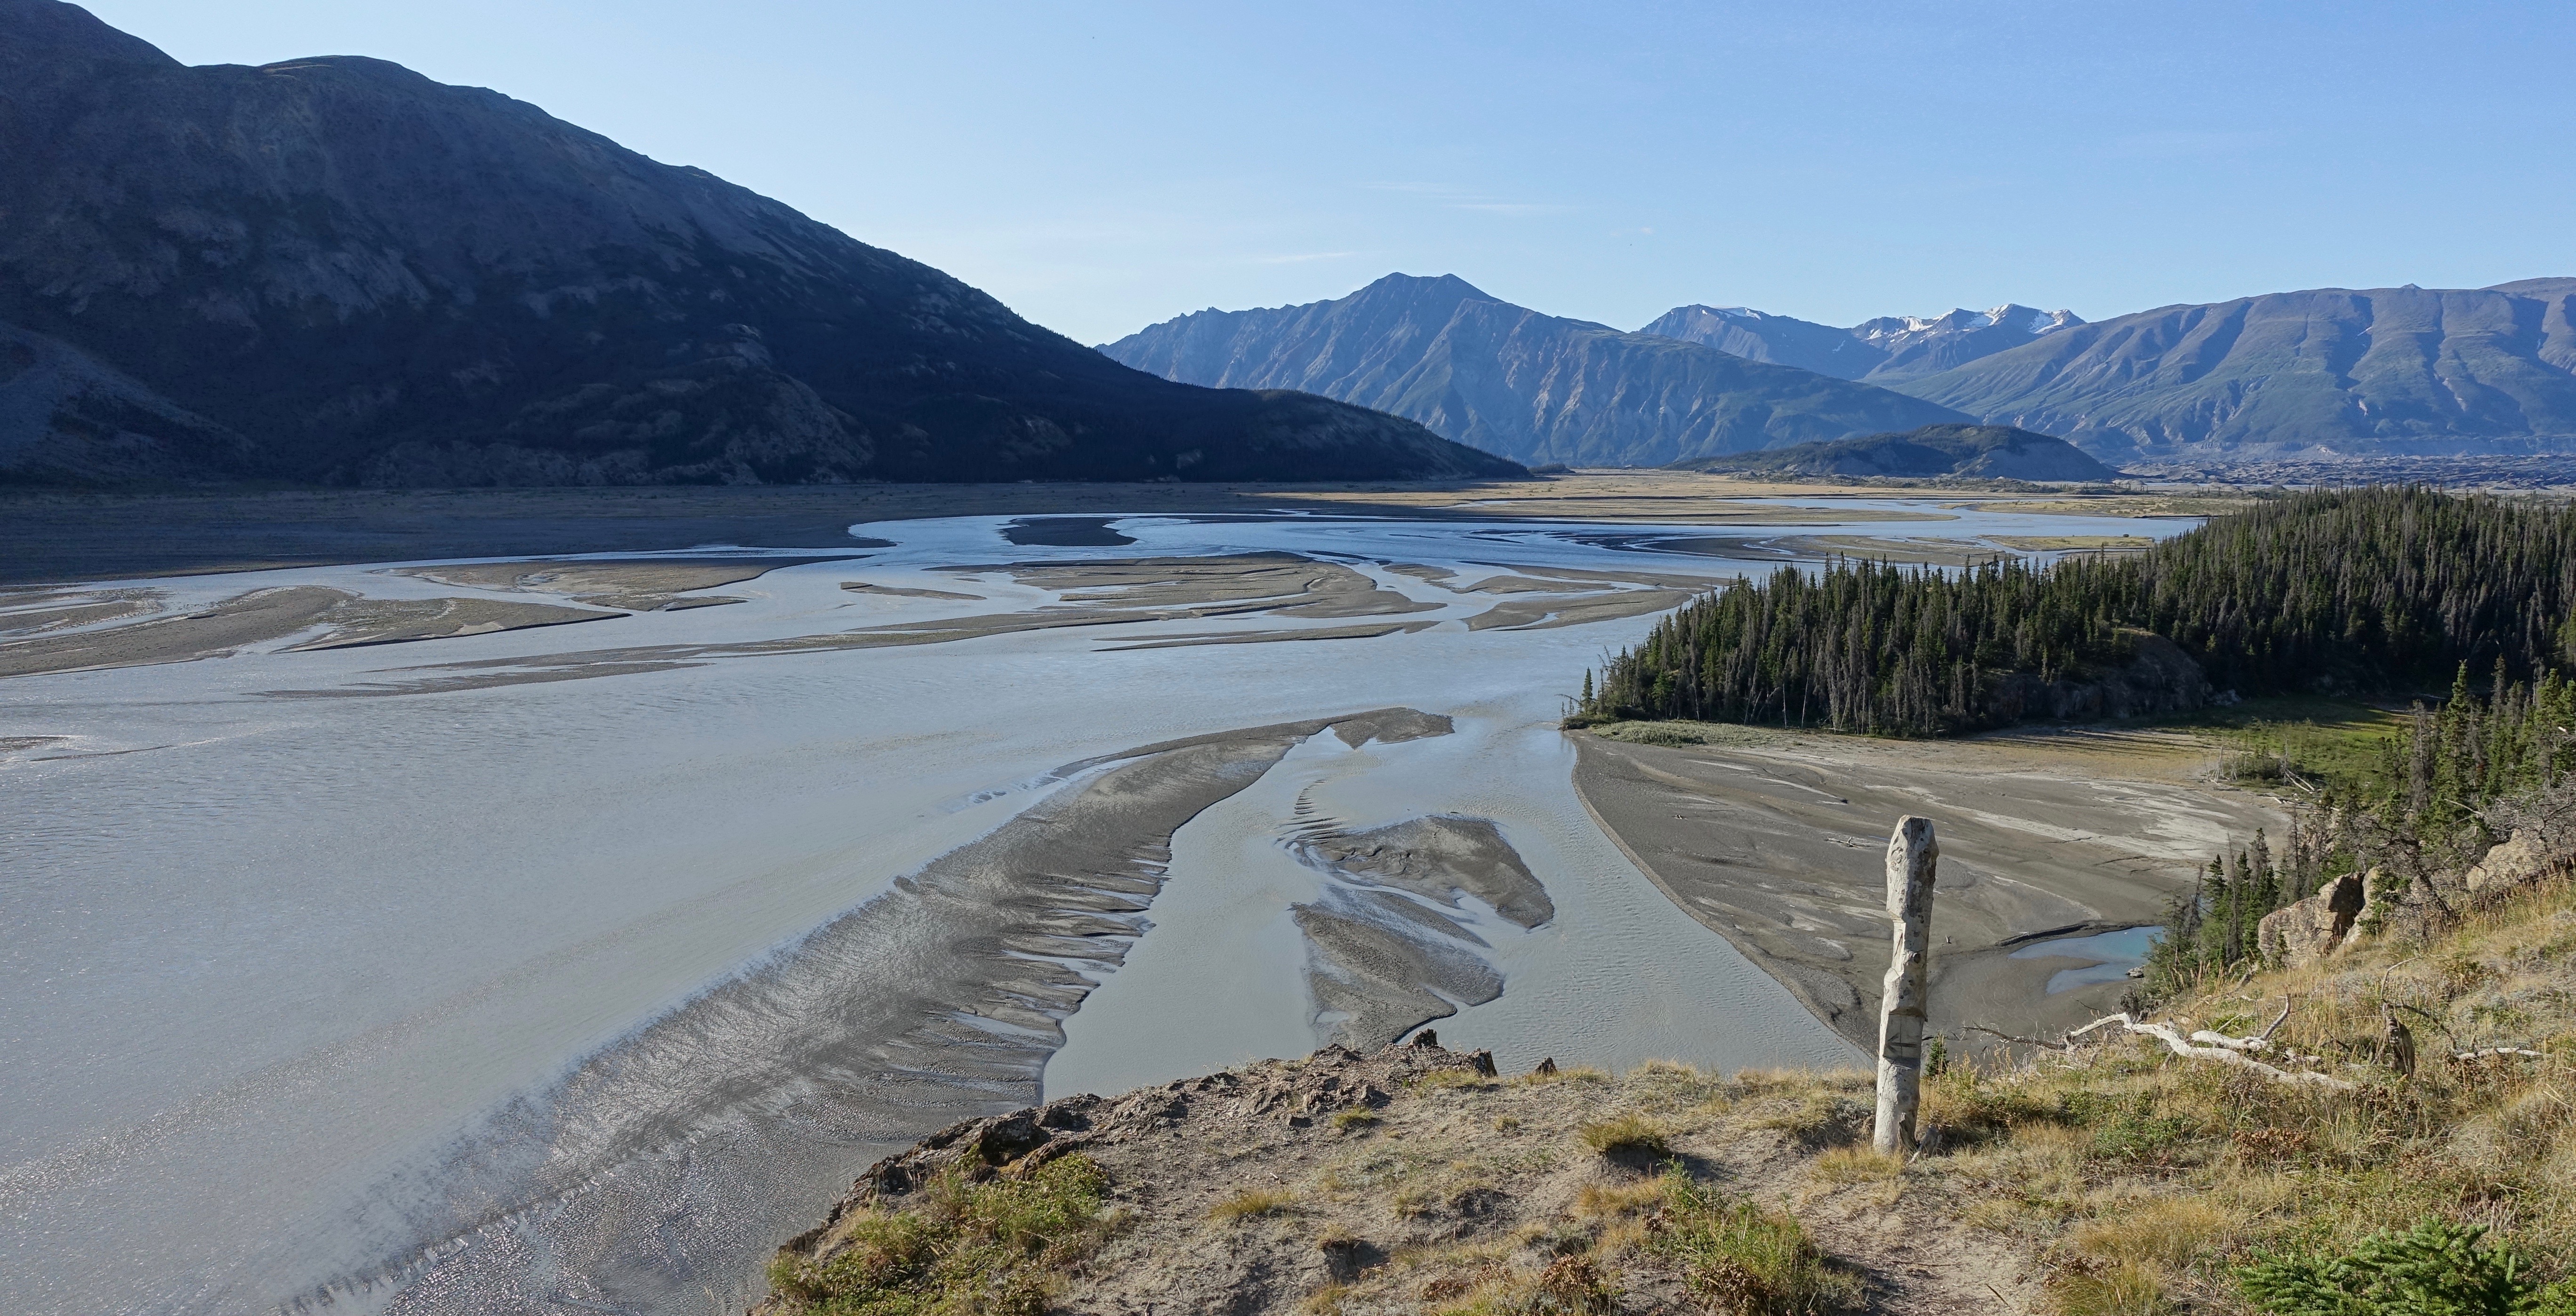 Braided river on the Slims West Trail in the Yukon